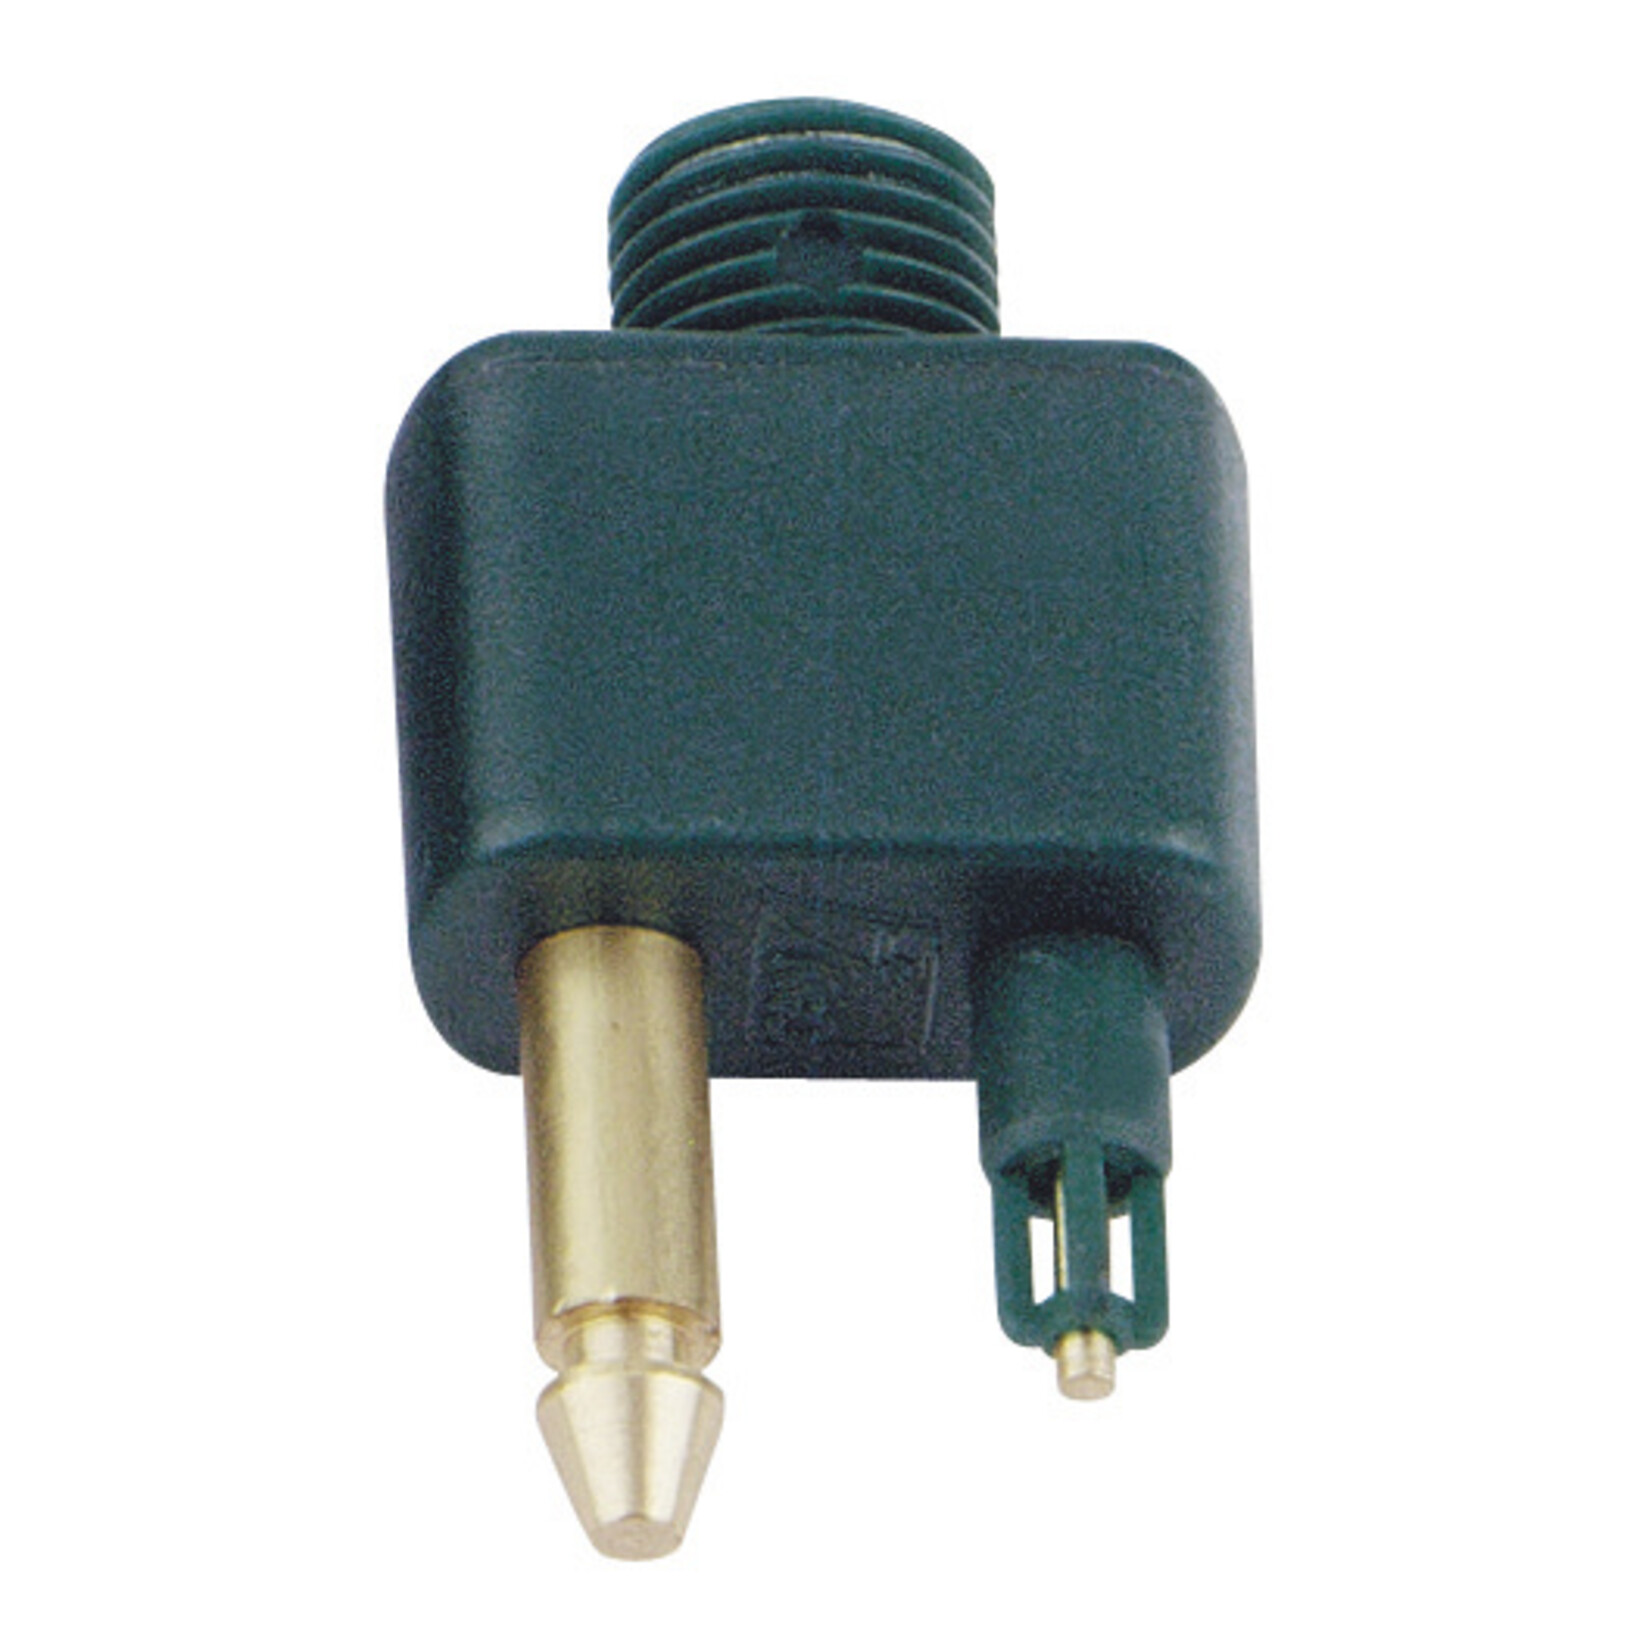 Plastimo Tank connector for omc